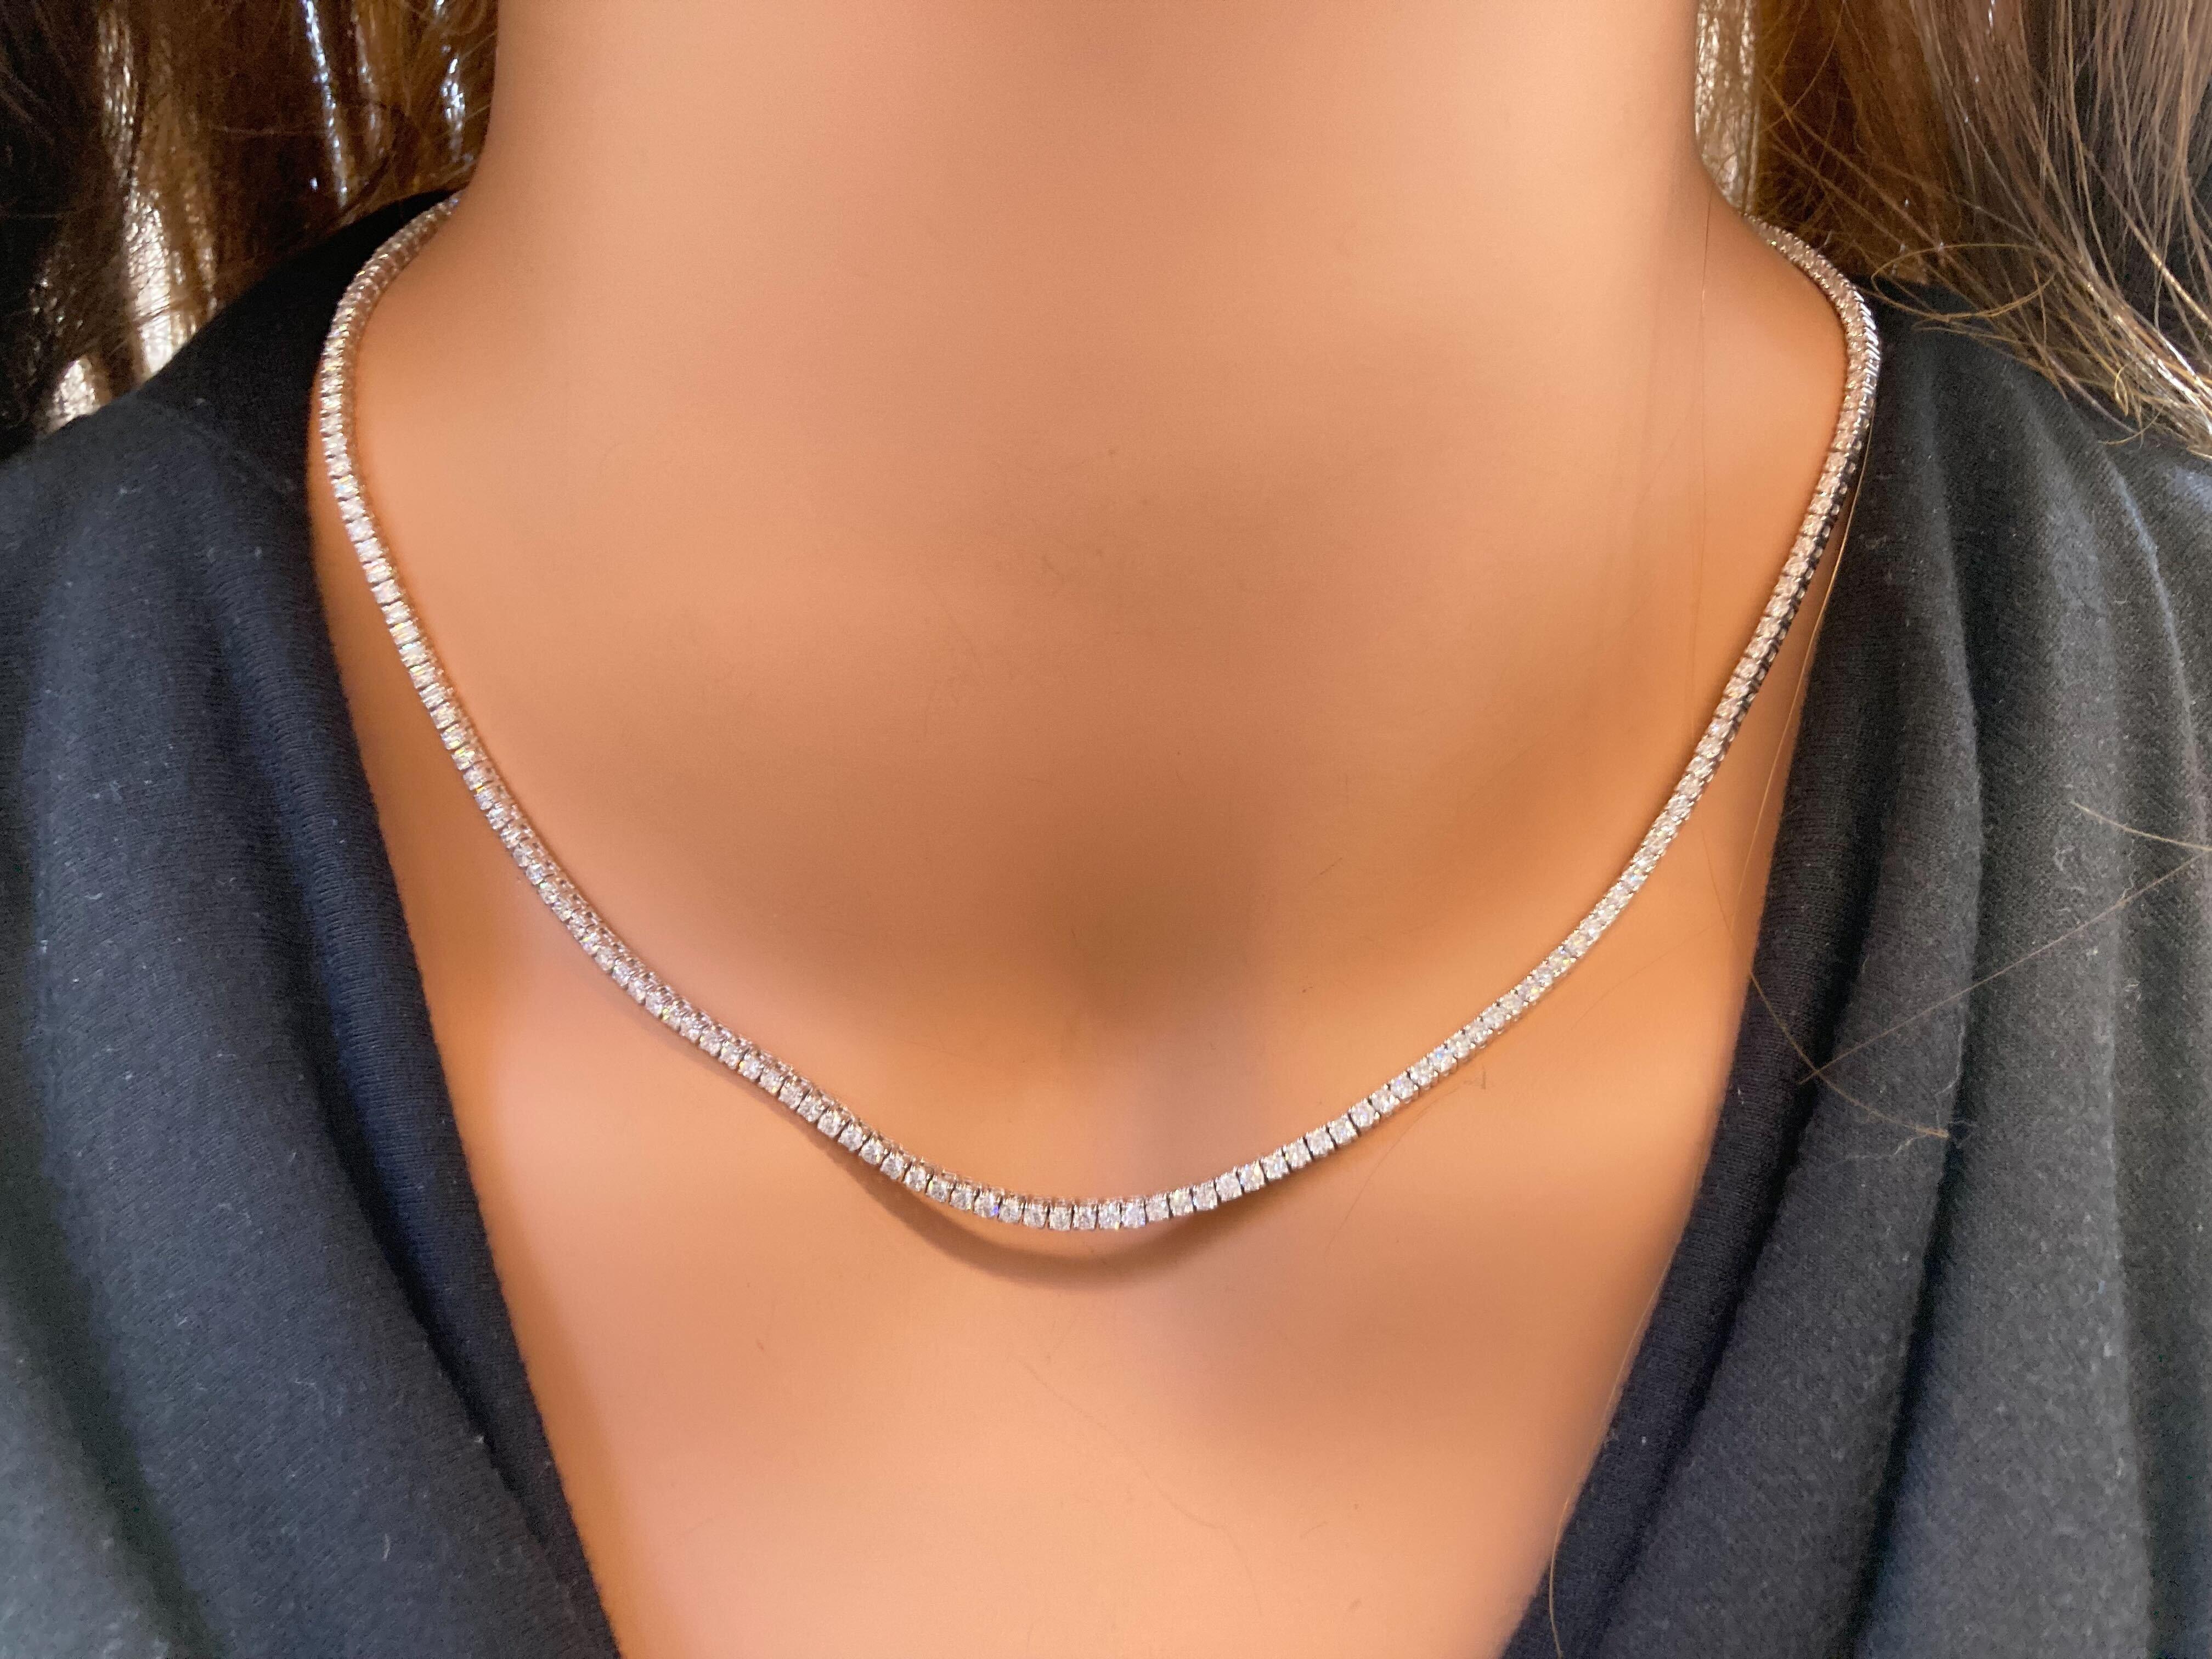 Introducing an extraordinary display of elegance and grandeur: our magnificent 10 carat round diamond Tennis Necklaces, meticulously crafted to adorn you with unparalleled beauty and luxury. Each necklace boasts a lavish total of 188 dazzling